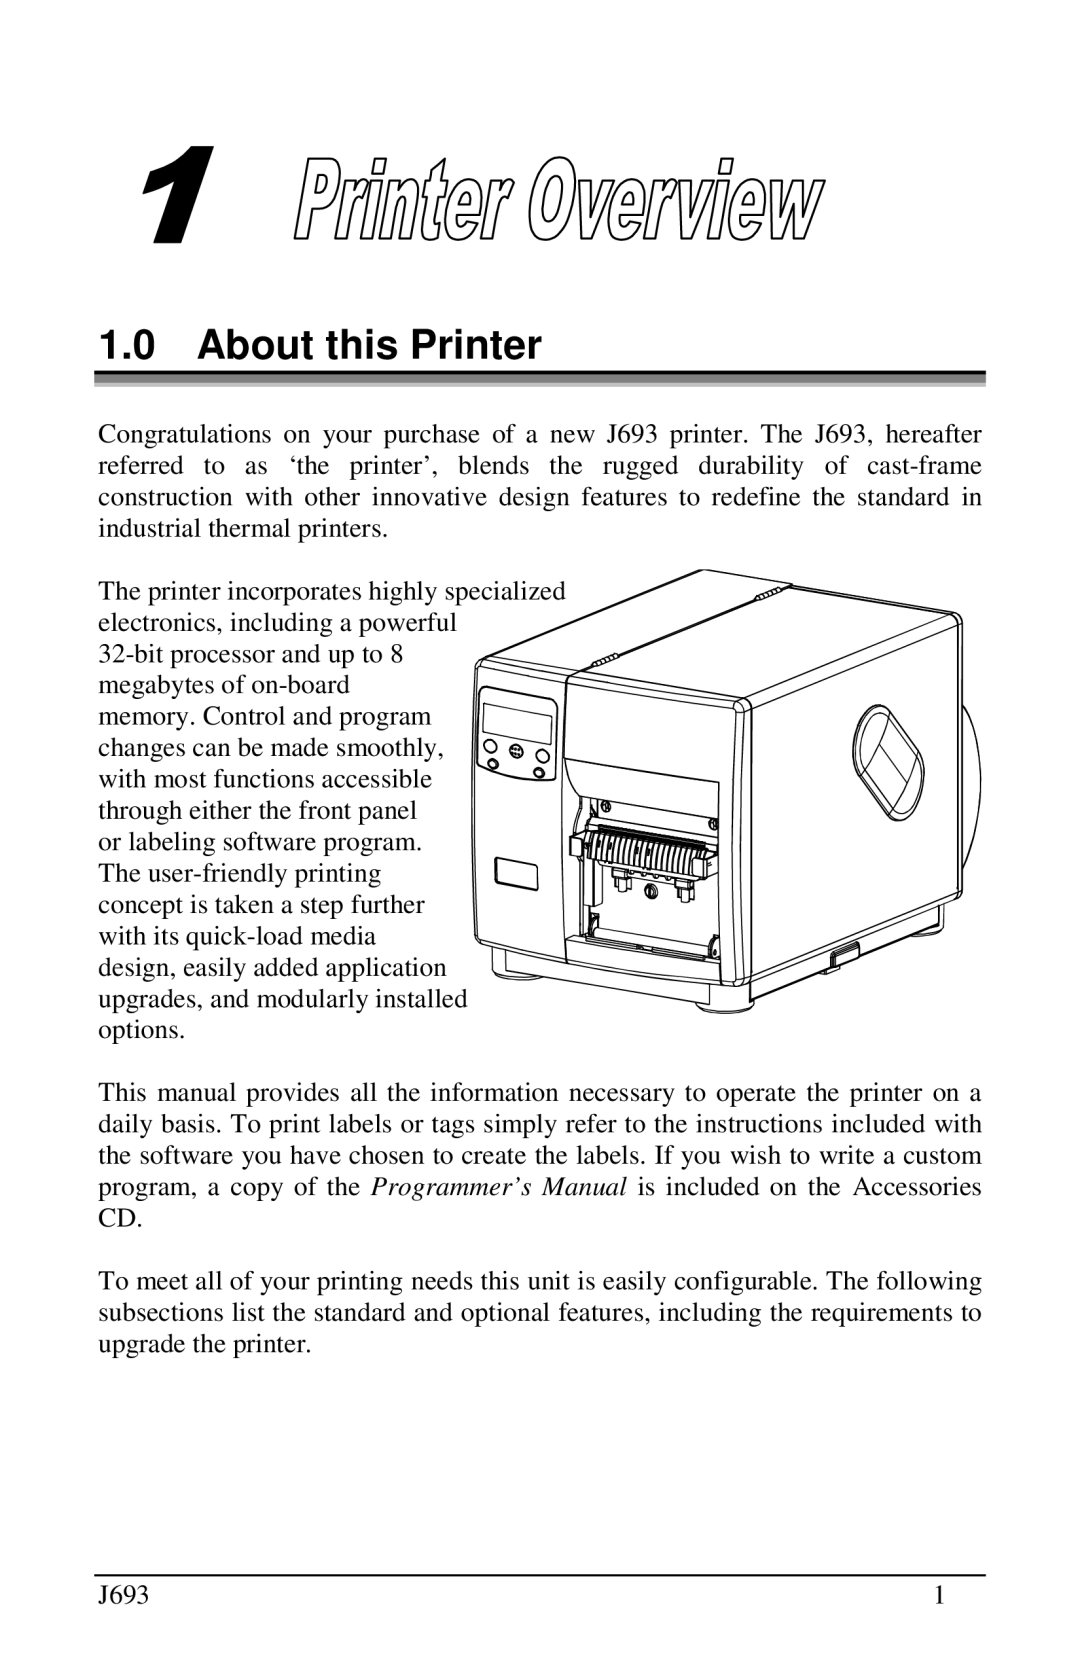 Pitney Bowes J693 manual About this Printer 